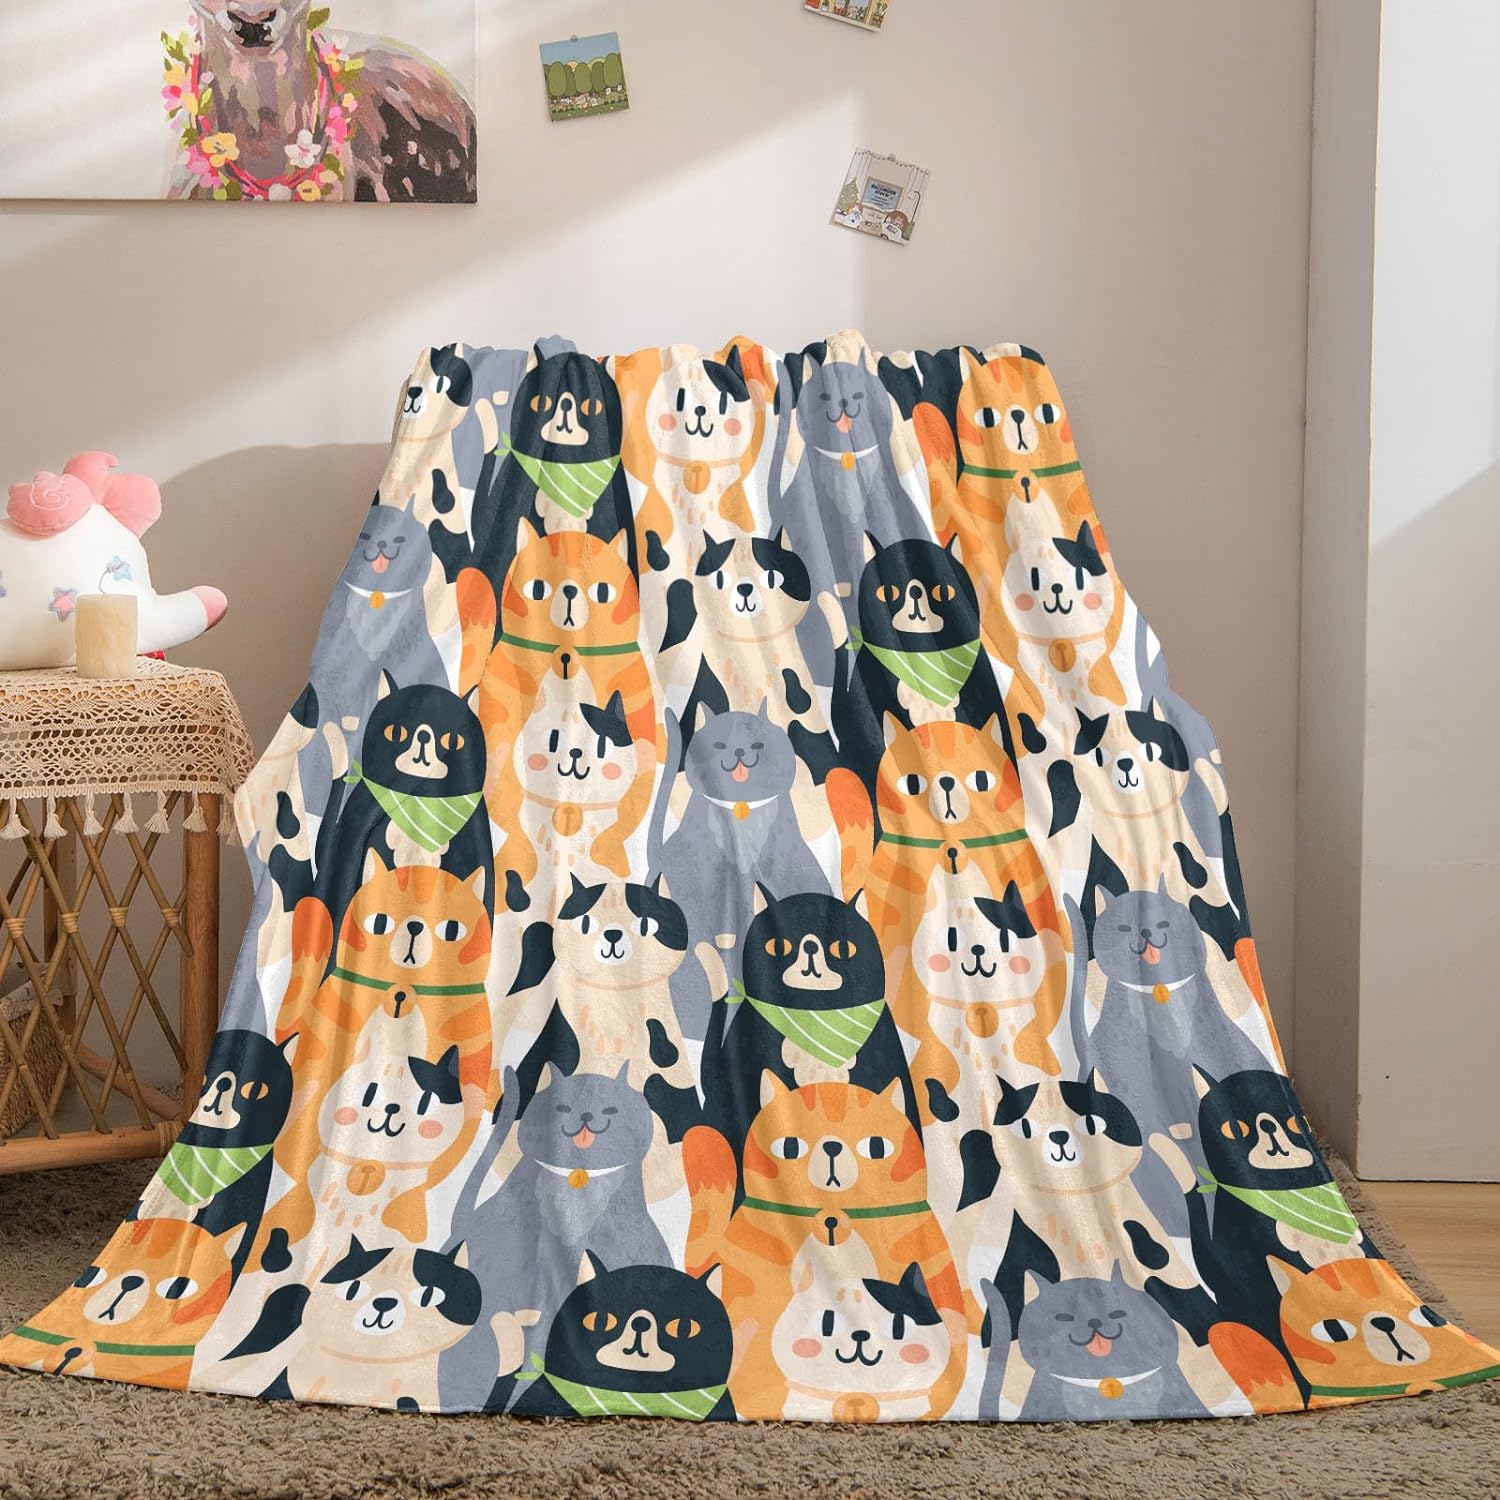 Bedbay Throw Blanket for Kids Boys Girls Cute Pet Cats Flannel Throw Blanket All Season Super Soft Cozy Blanket for Bed Couch Kawaii Cat Boys Girls Throw Blanket(Muti,Throw(5060))